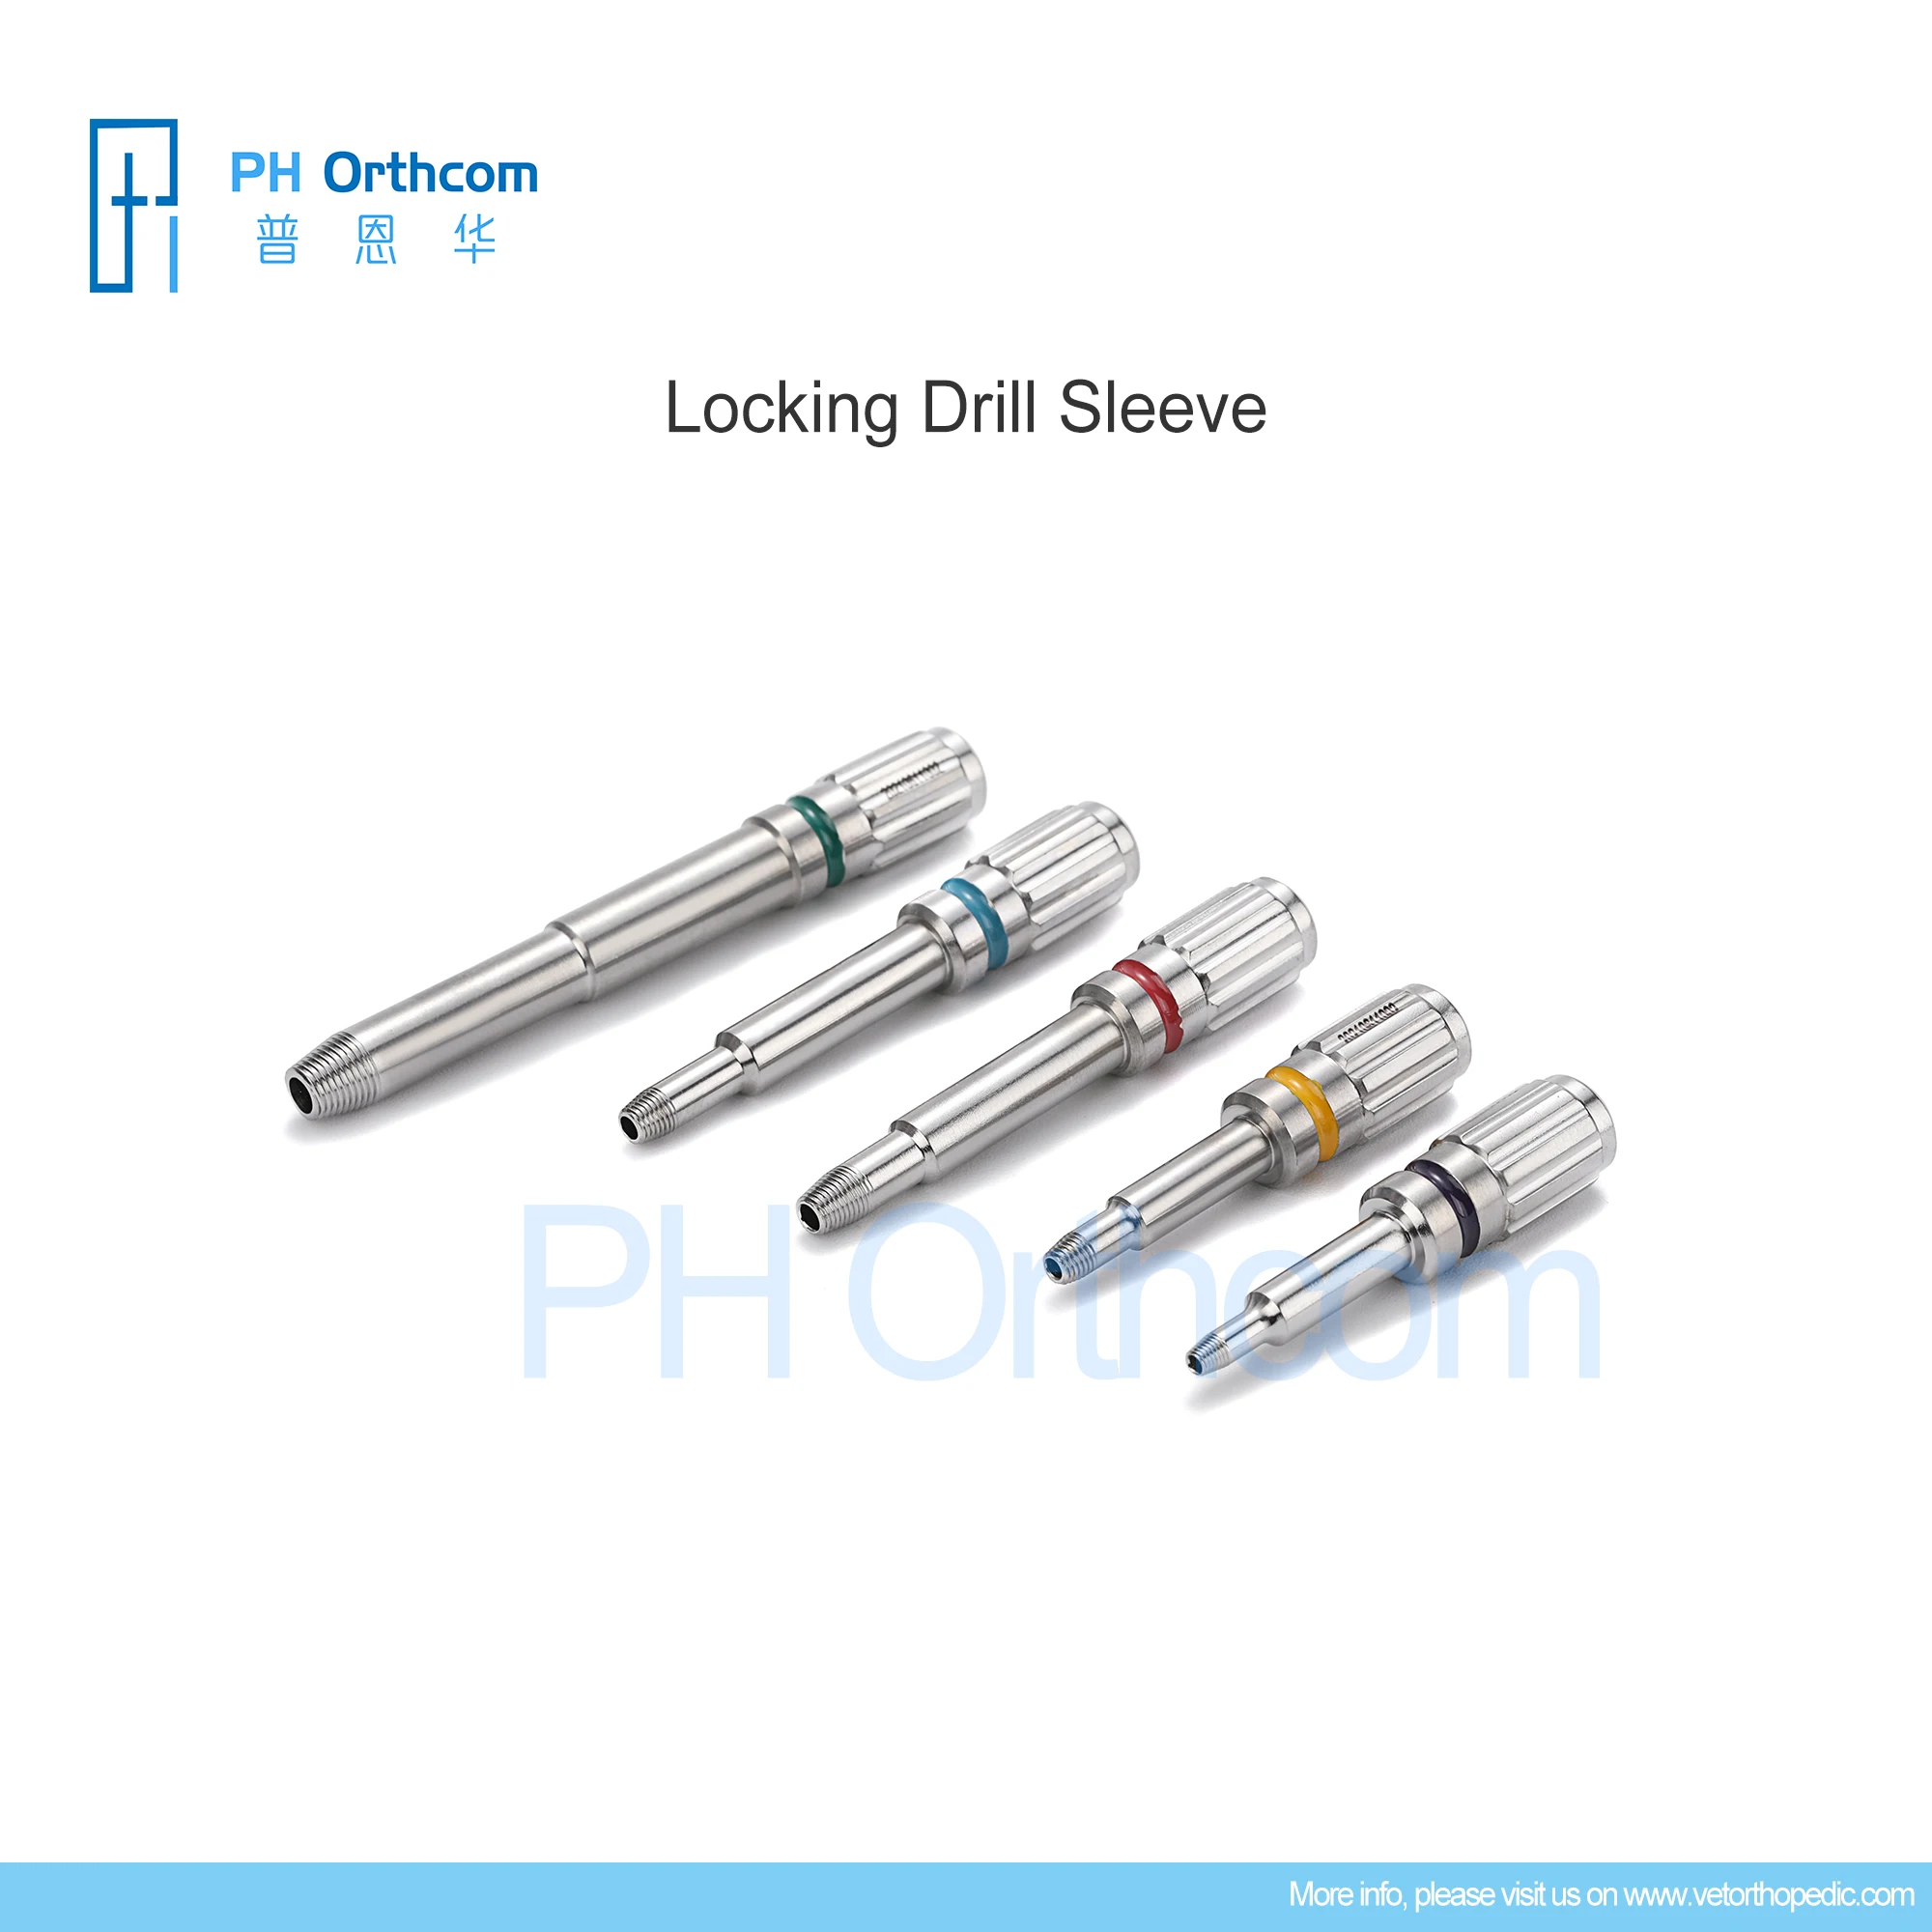 

Locking Drill Sleeve Orthopedic Surgery Veterinary Pets Mascotas Surgical Instruments Medical Supplies and Equipment